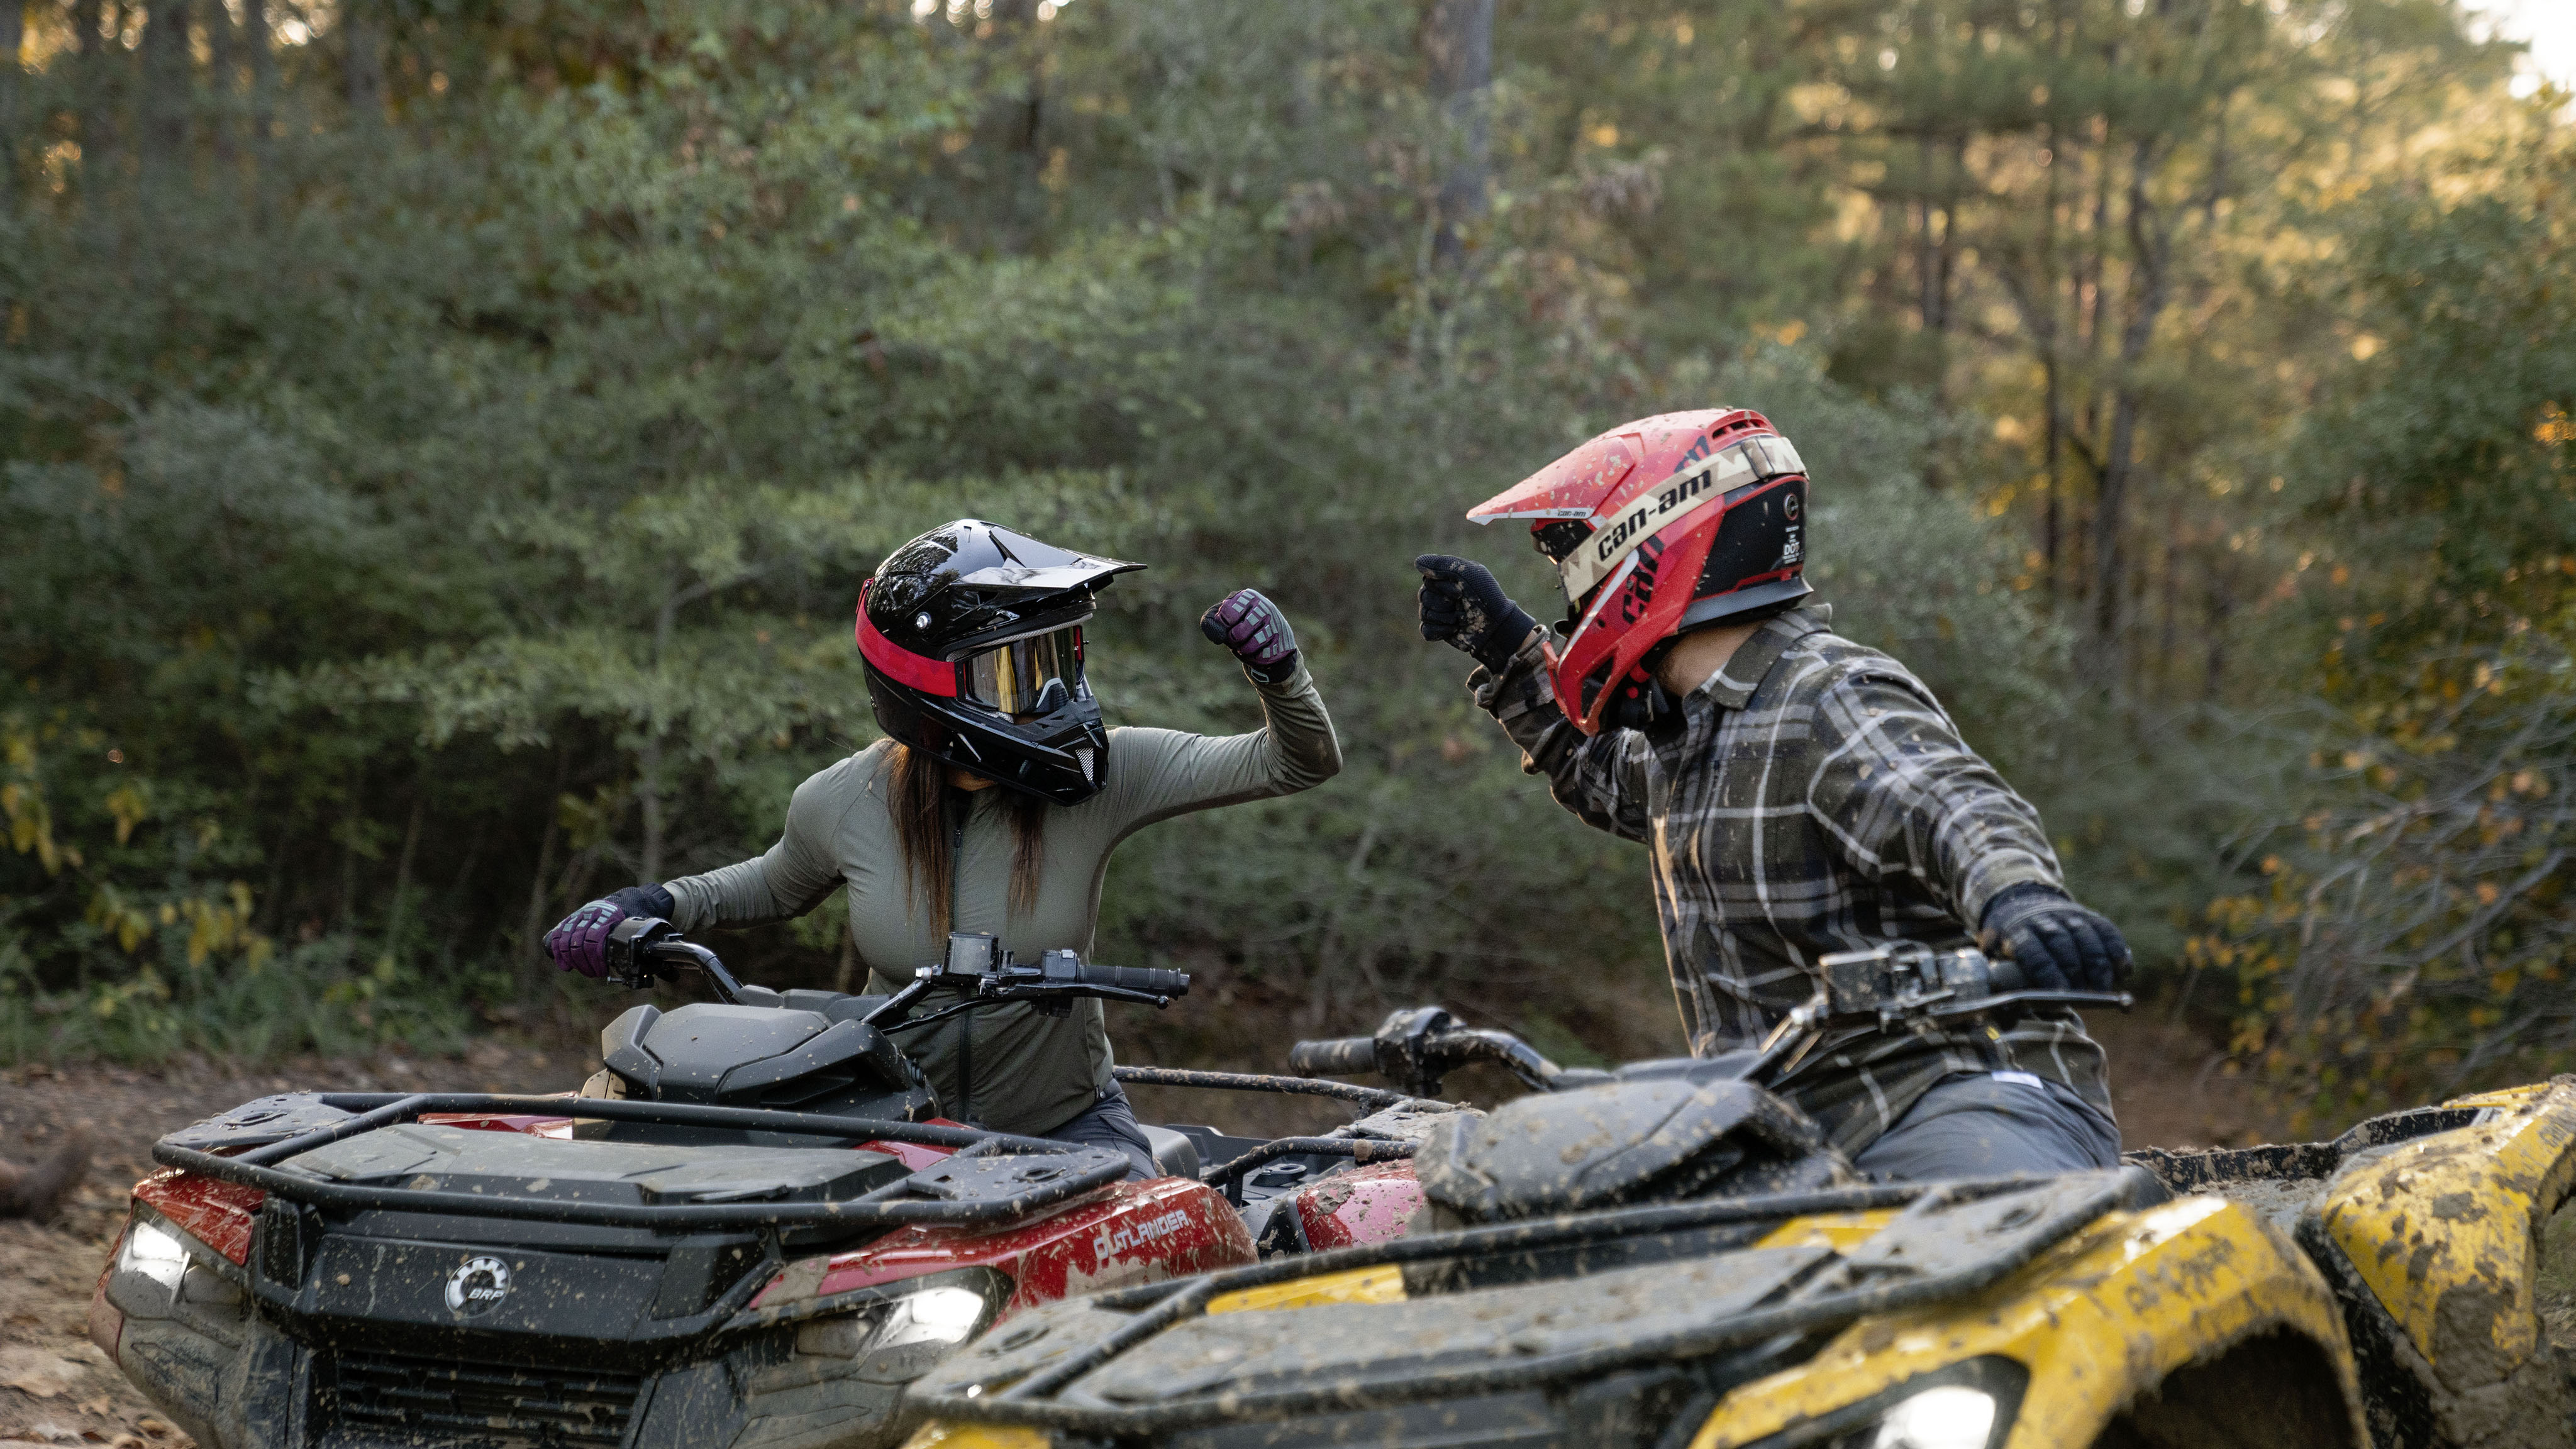 Two Can-Am riders fist bumping from their Can-Am Outlander 500/700 seats